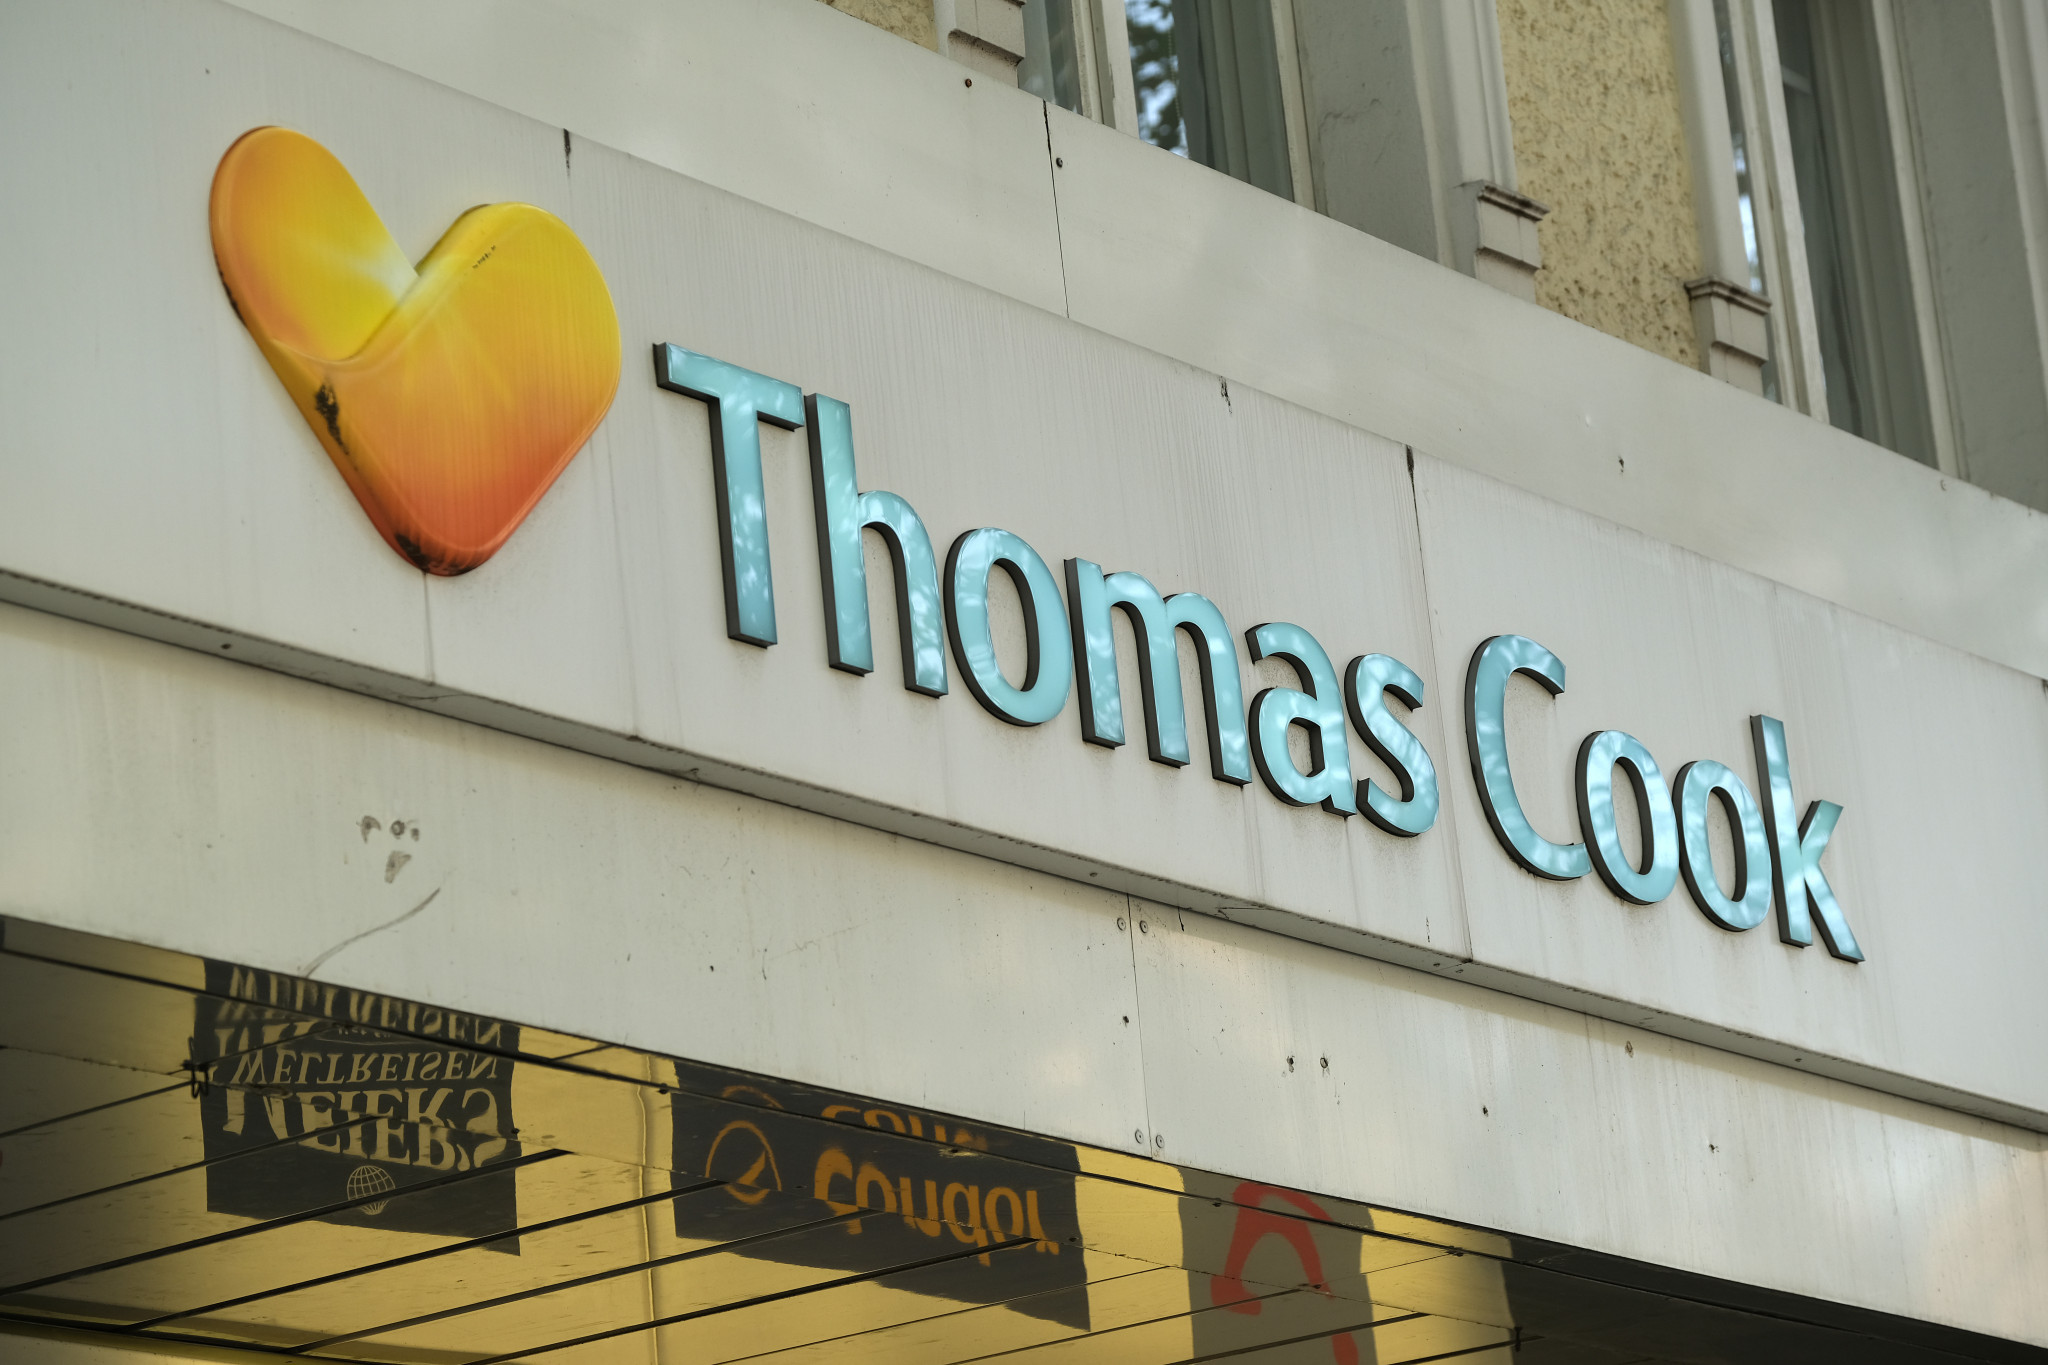 Thomas Cook has collapsed after a rescue deal could not be reached ©Getty Images